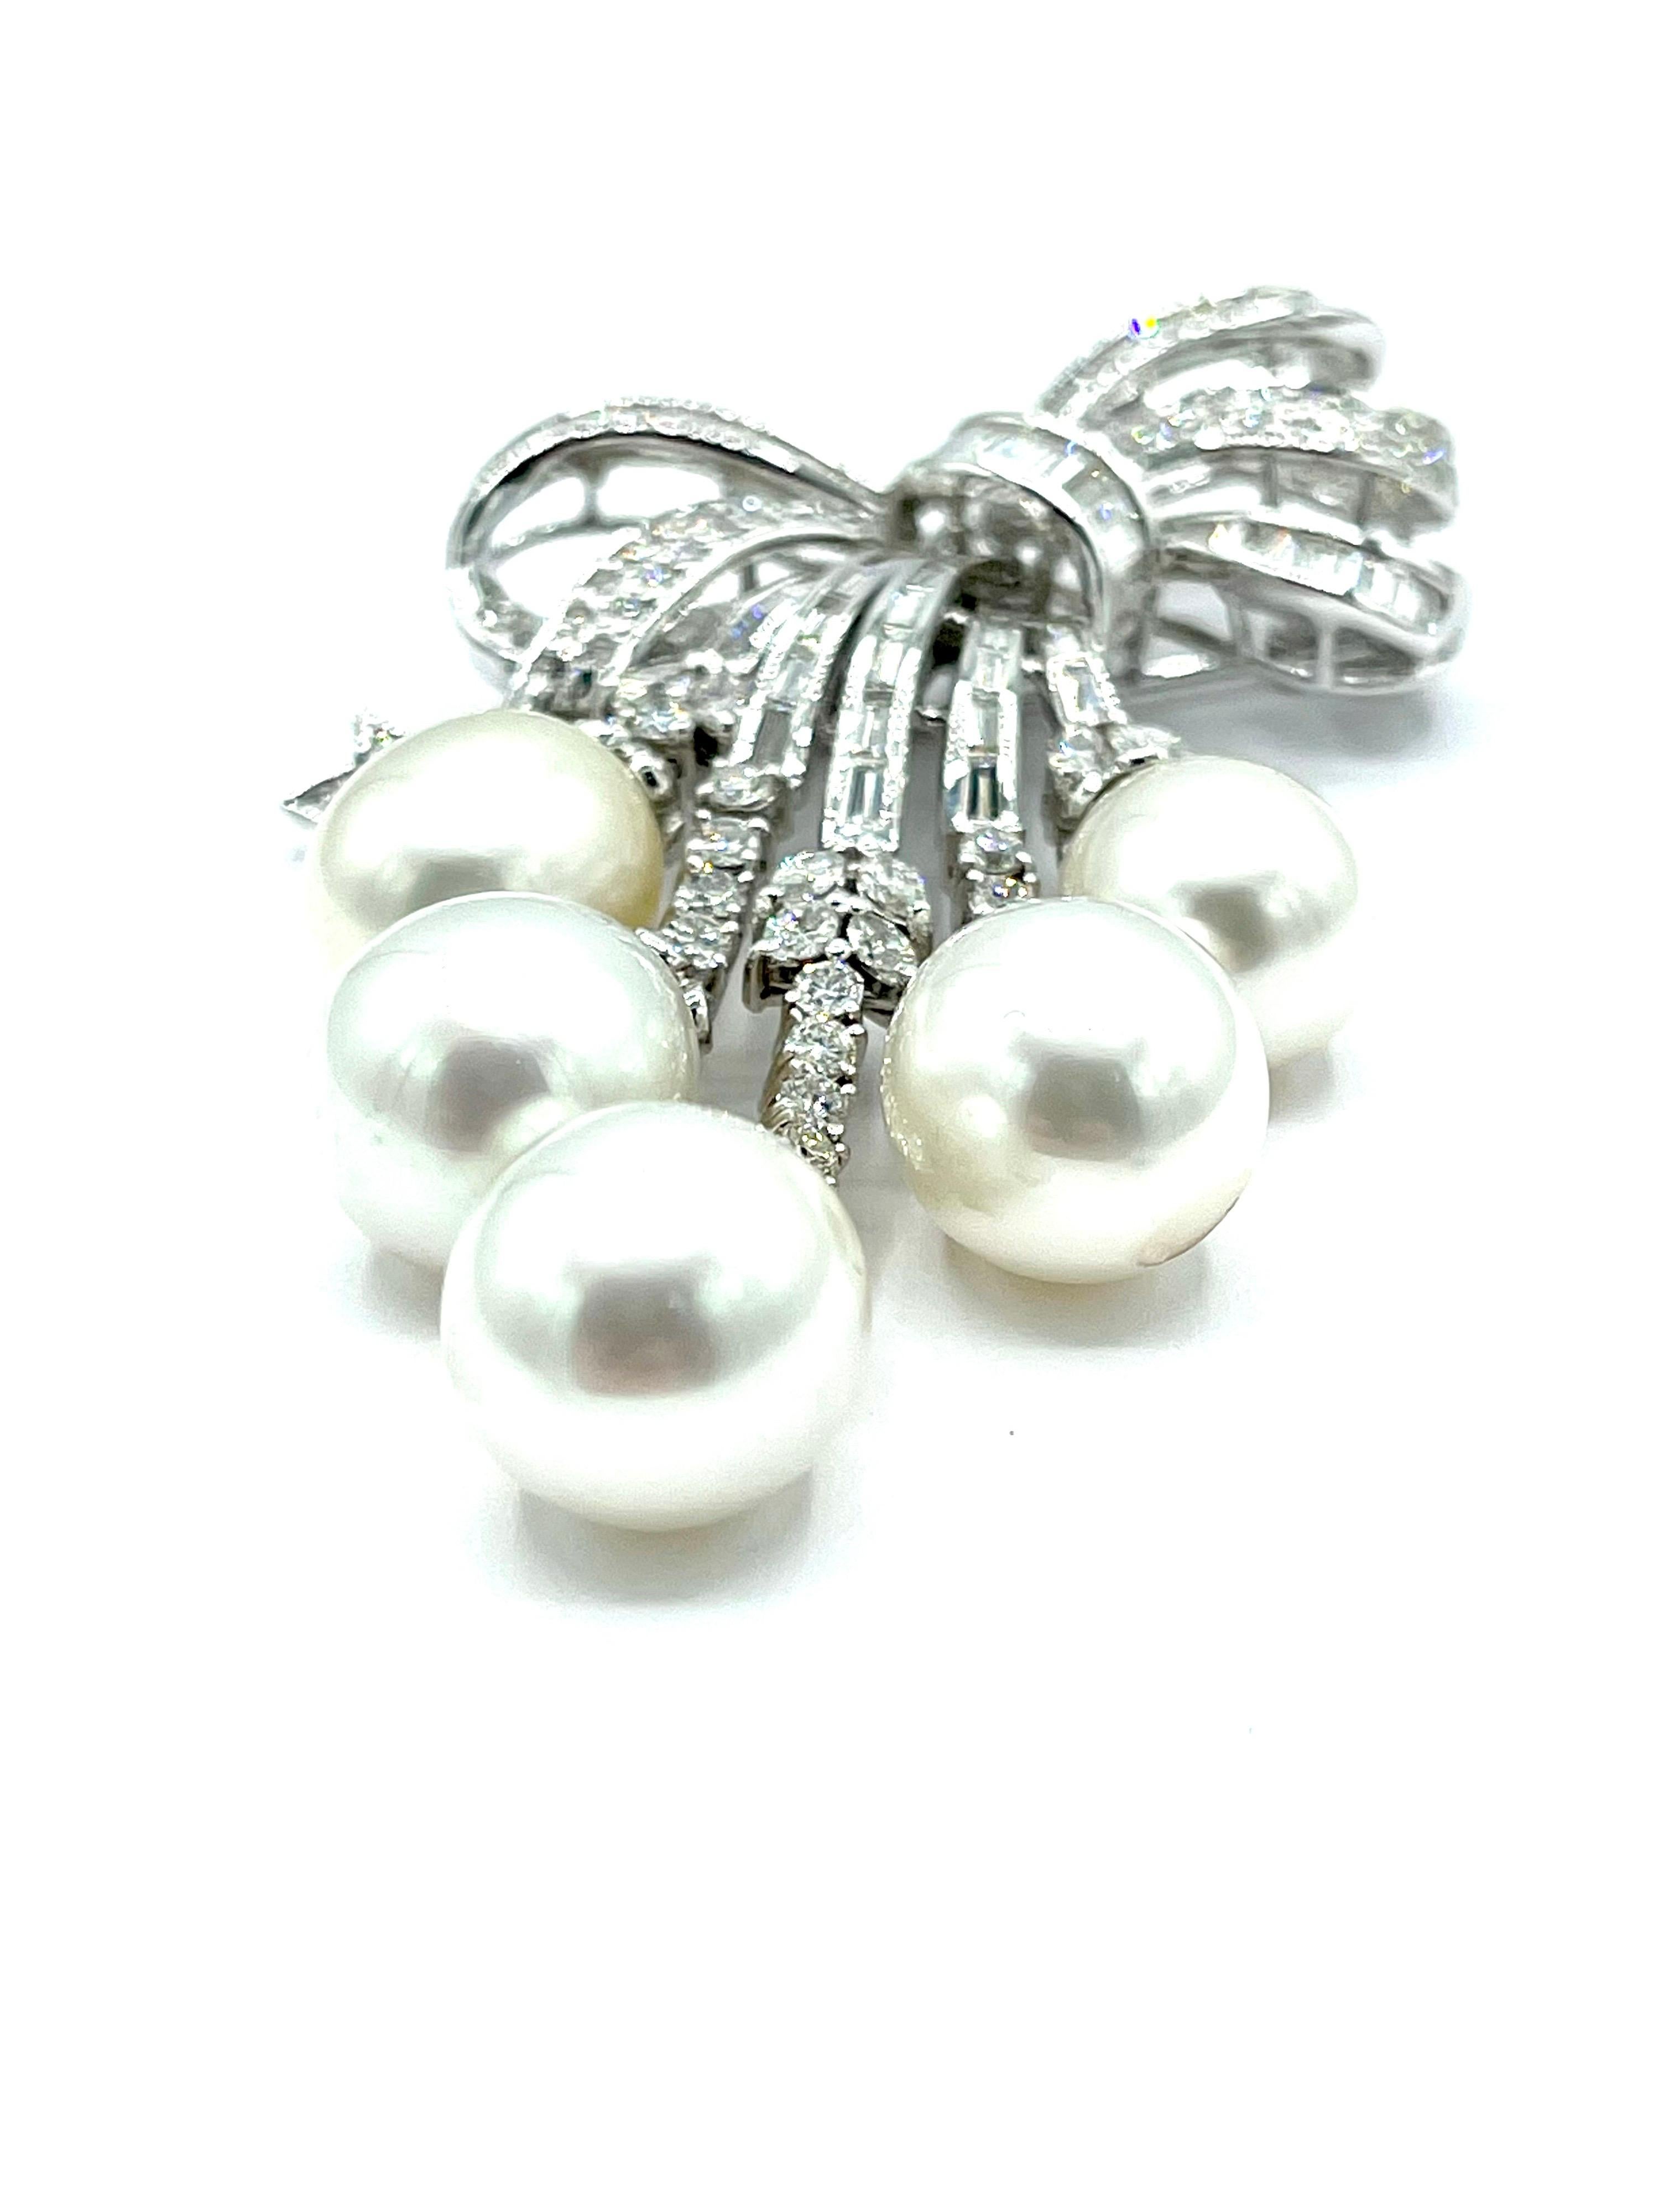 Round Cut South Sea Pearl and Diamond 18k White Gold Pendant Brooch